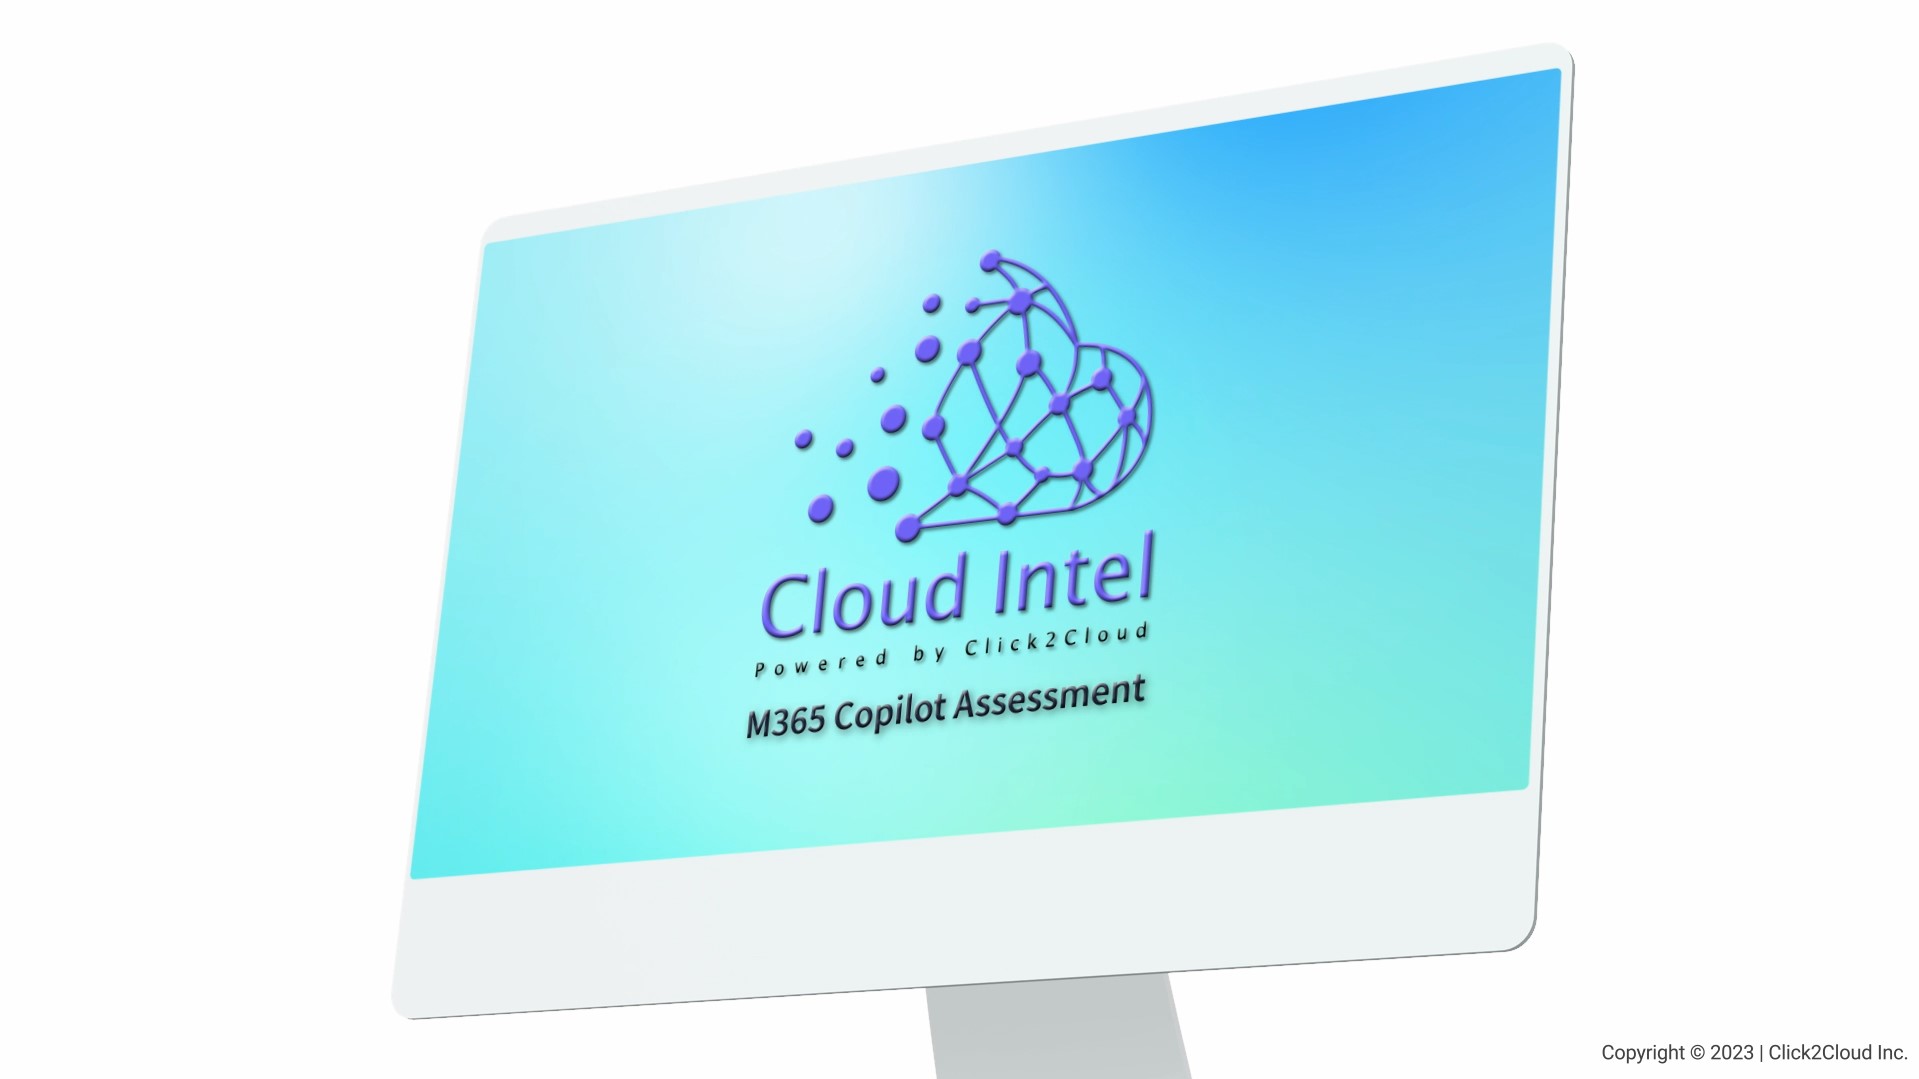 Click2cloud-Usher in a Brighter Future of Work with Cloud Intel’s M365 Copilot Assessment_Video